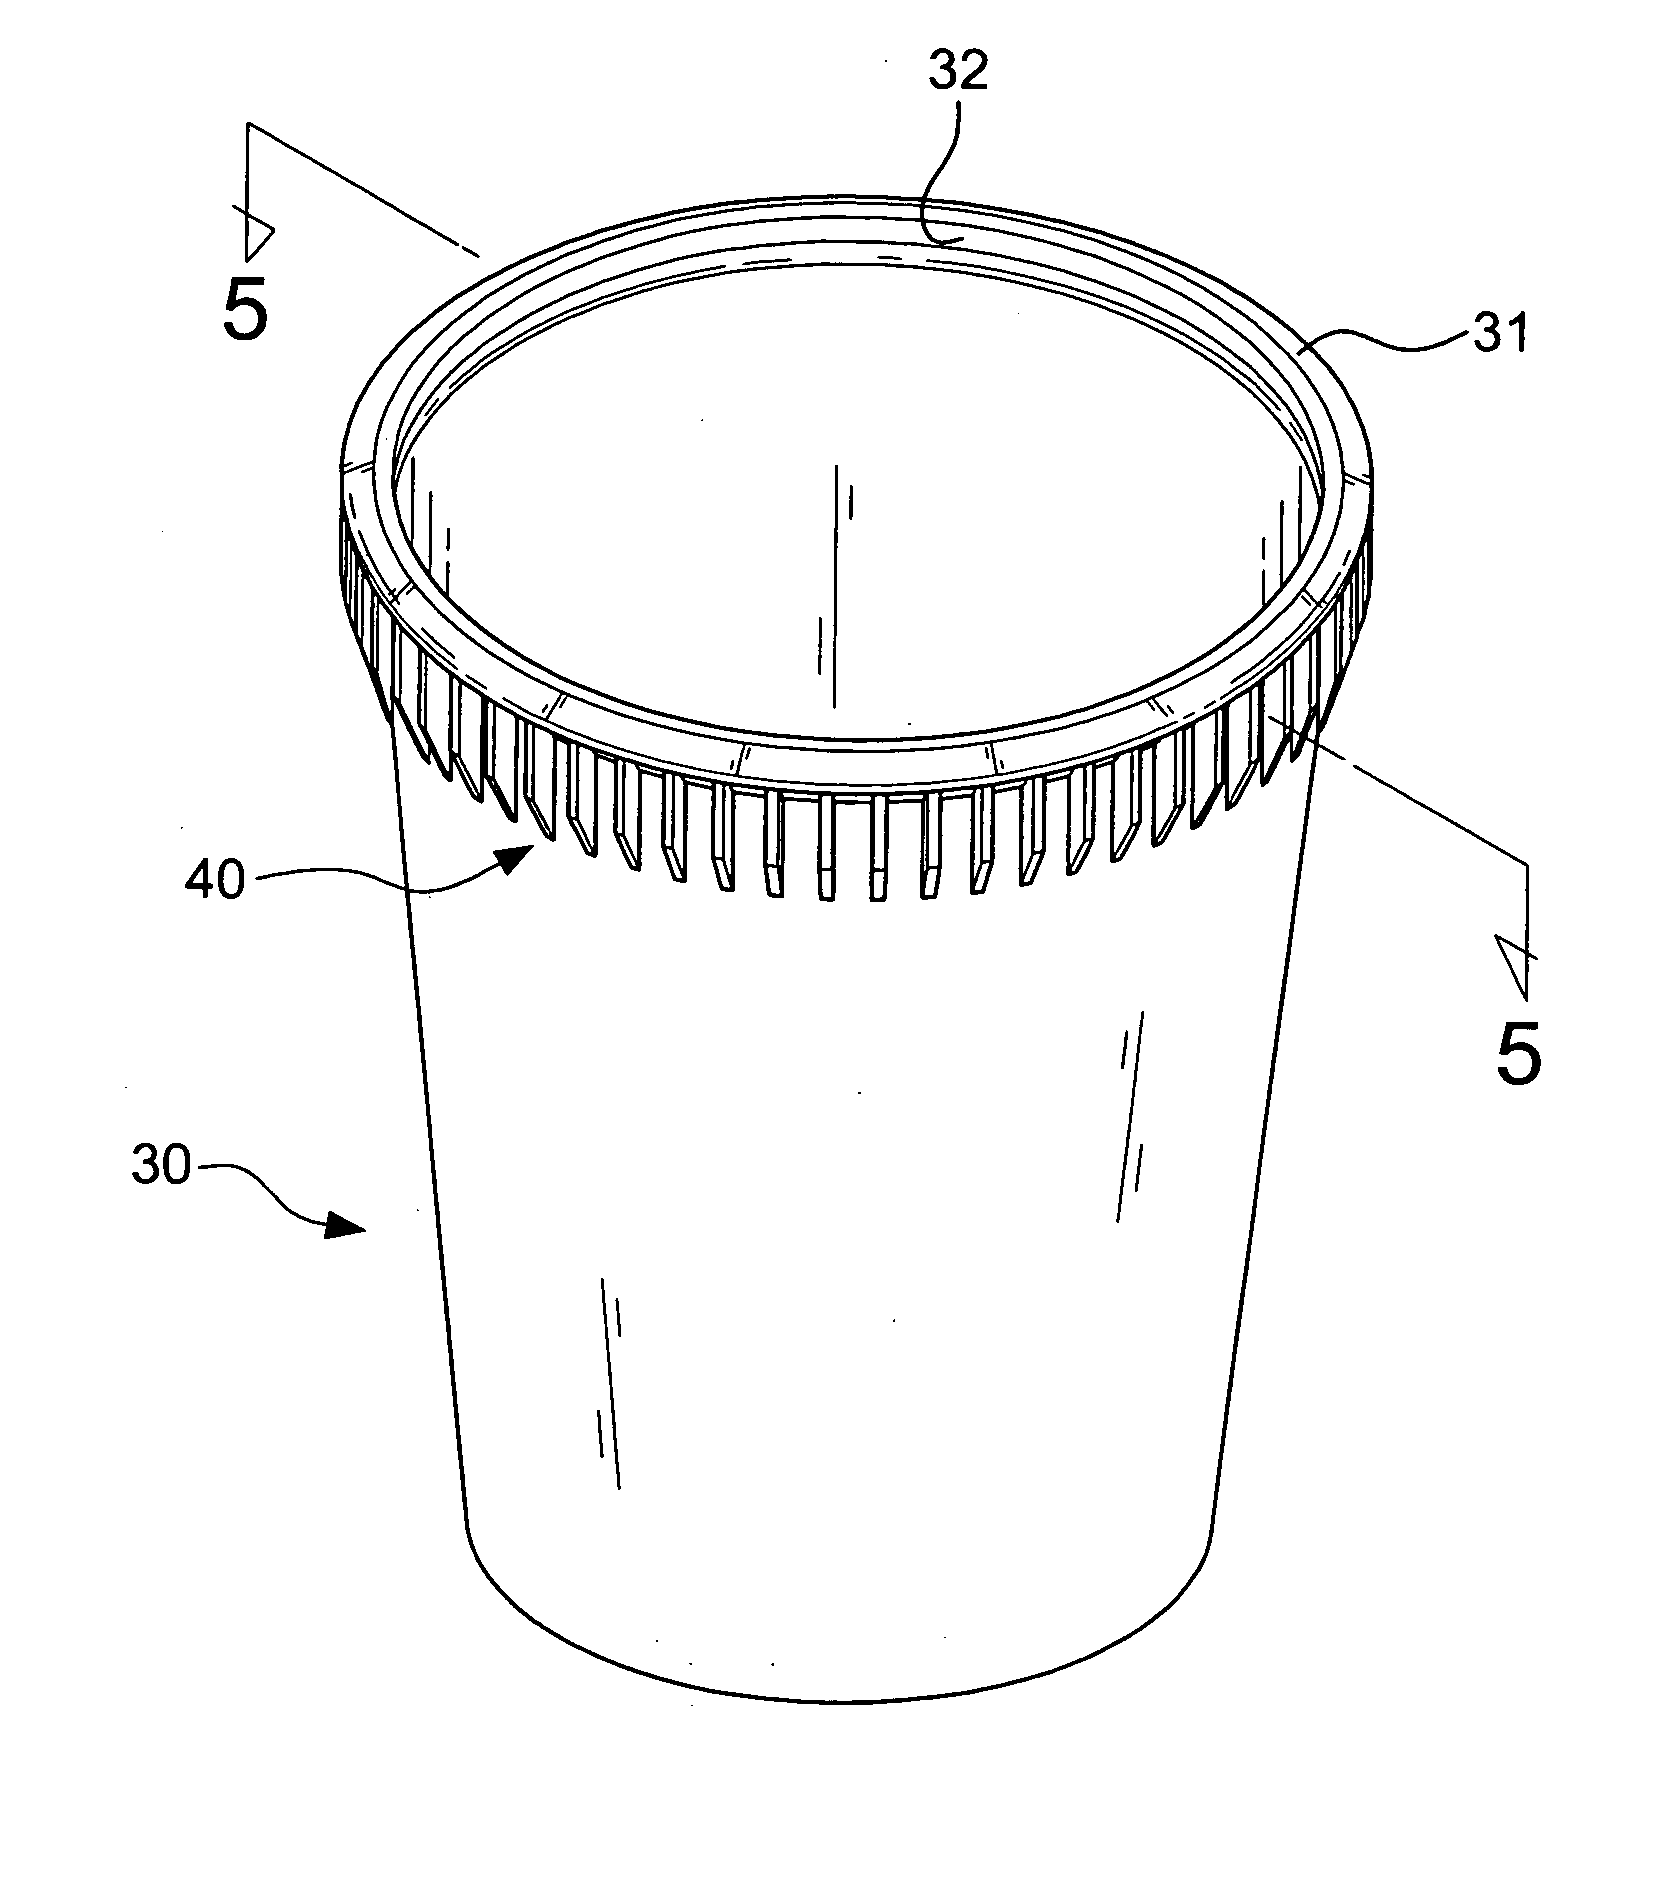 Integral heat-resisting structure of a disposable drinking cup